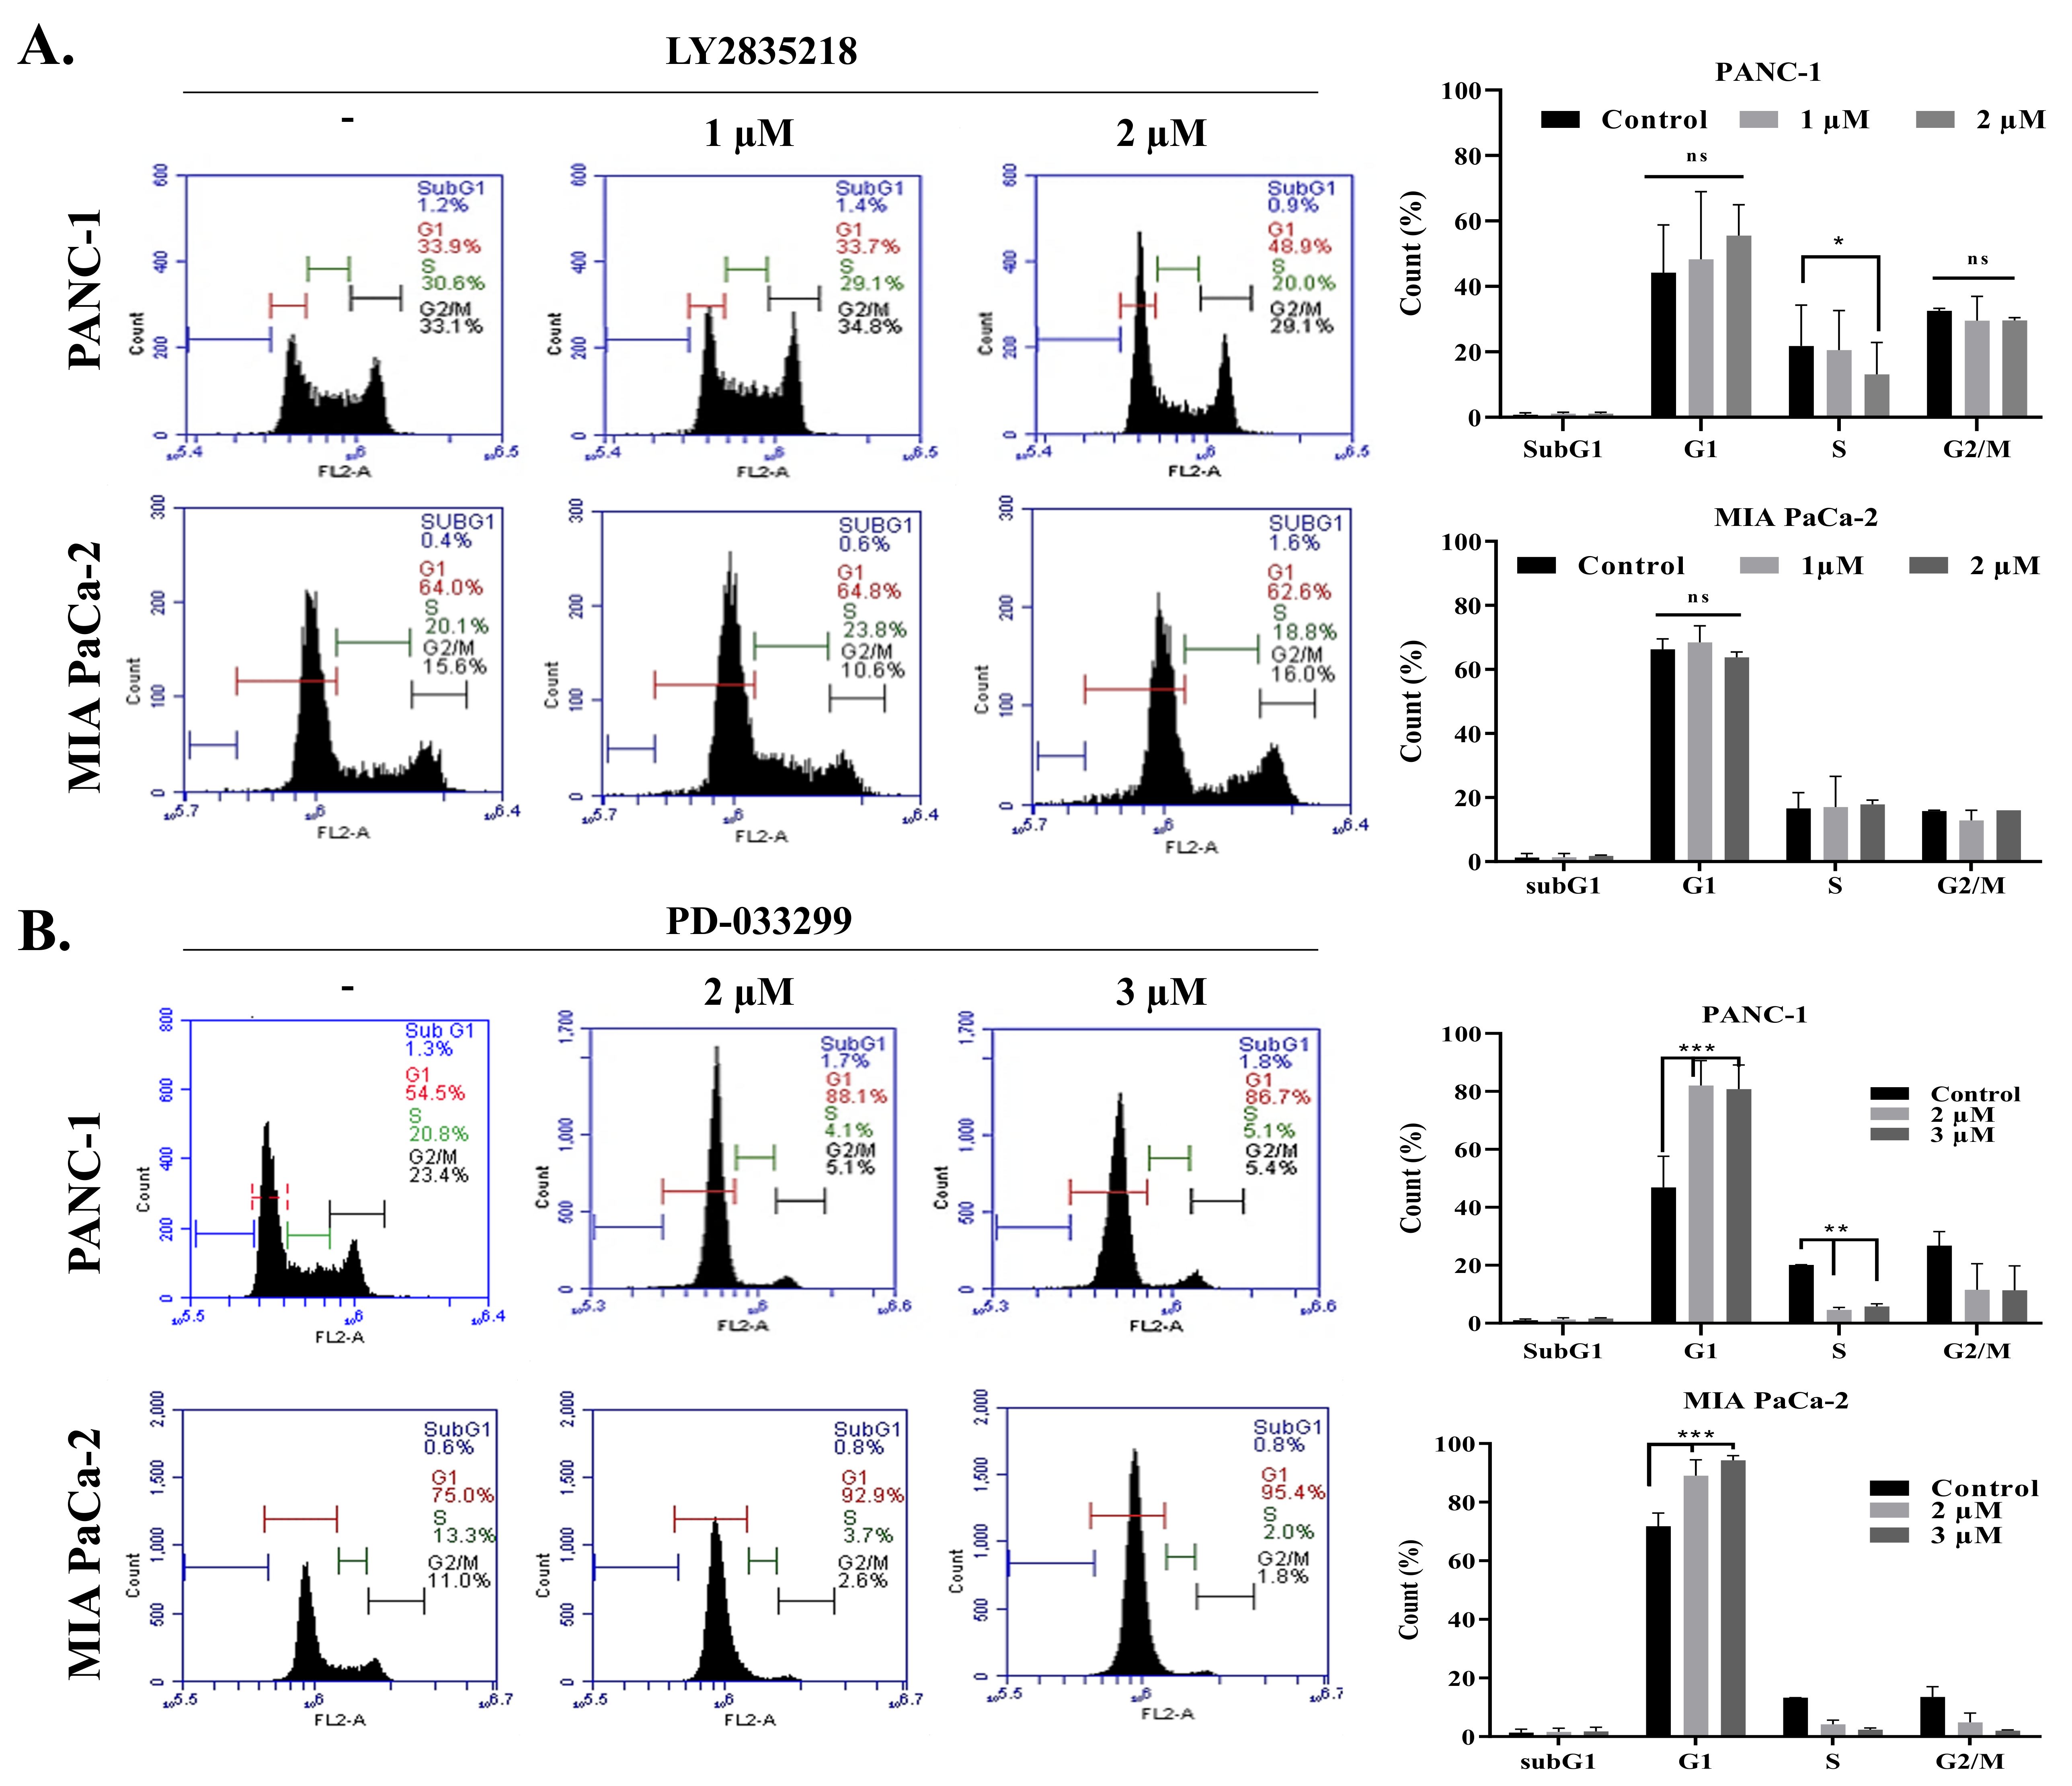 Stresses | Free Full-Text | AMPK Is the Crucial Target for the CDK4/6  Inhibitors Mediated Therapeutic Responses in PANC-1 and MIA PaCa-2  Pancreatic Cancer Cell Lines | HTML